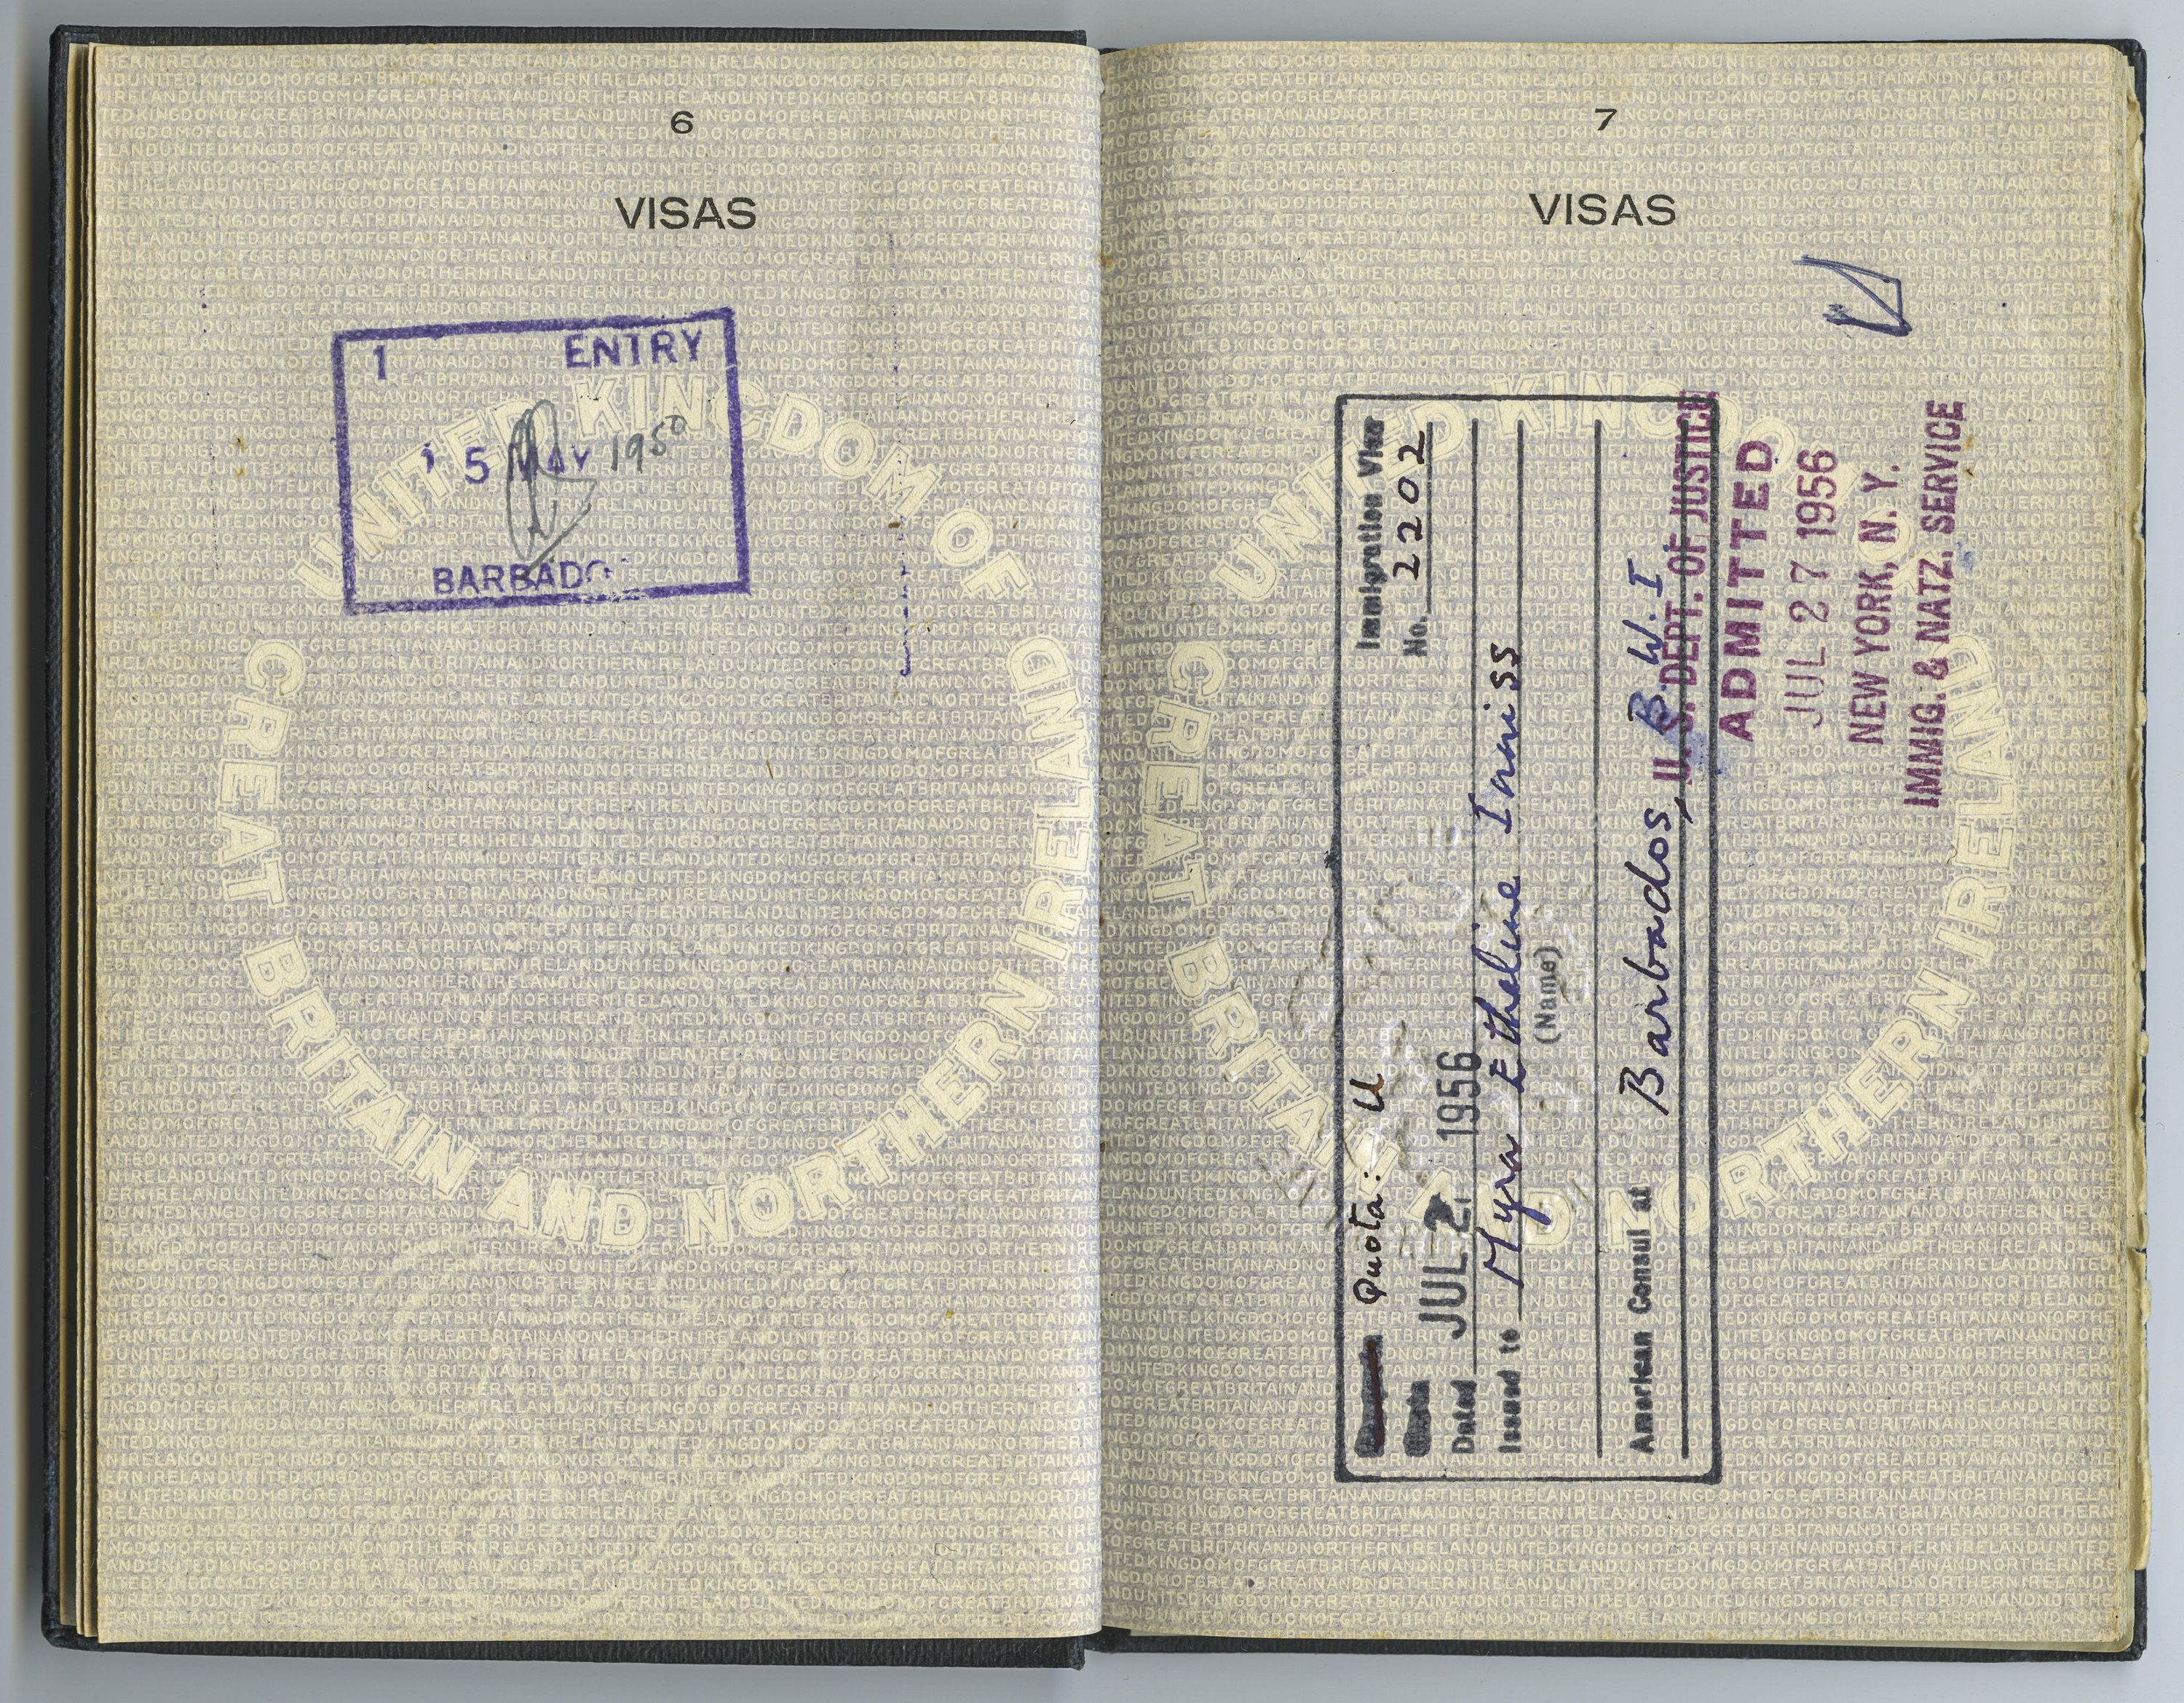 Visa stamps from entering Barbados in 1950 and New York in 1956.